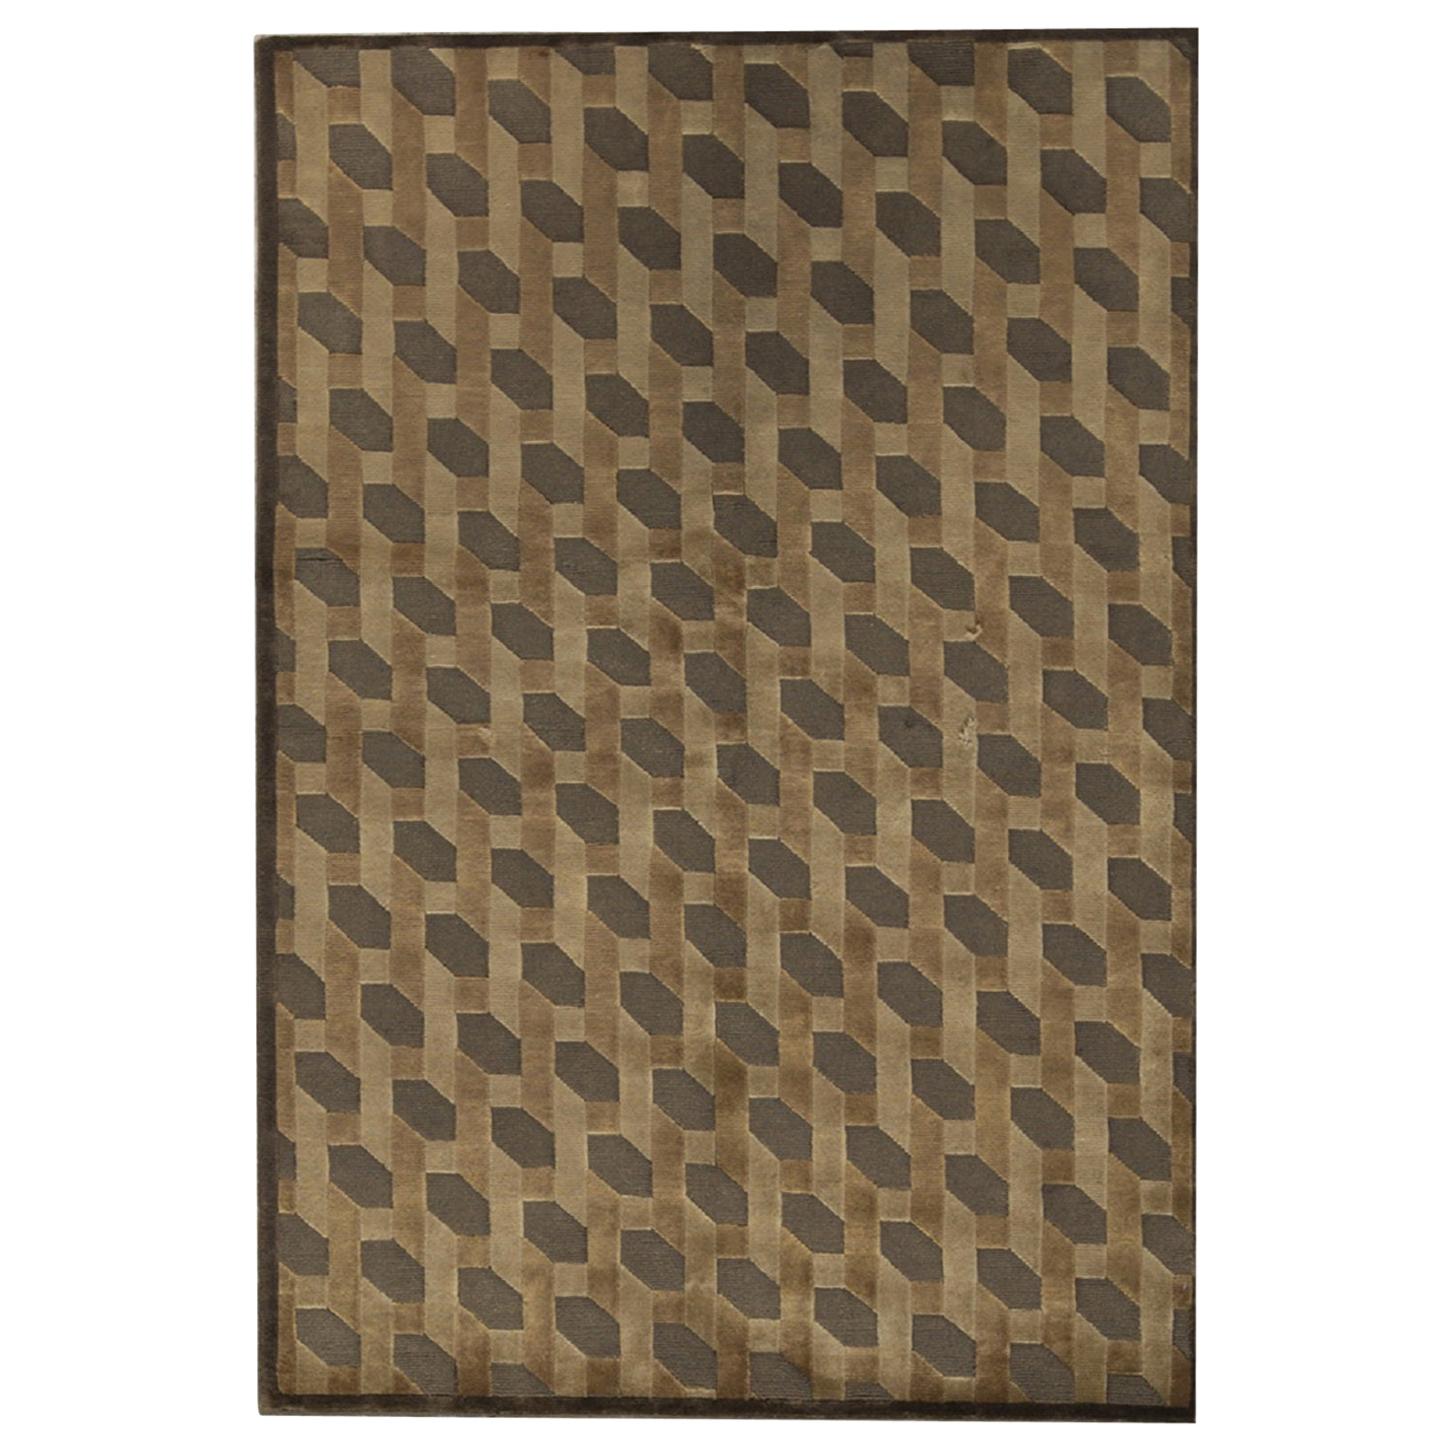 One of a Kind Contemporary Handwoven Wool Area Rug 4'6 x 6'8 For Sale